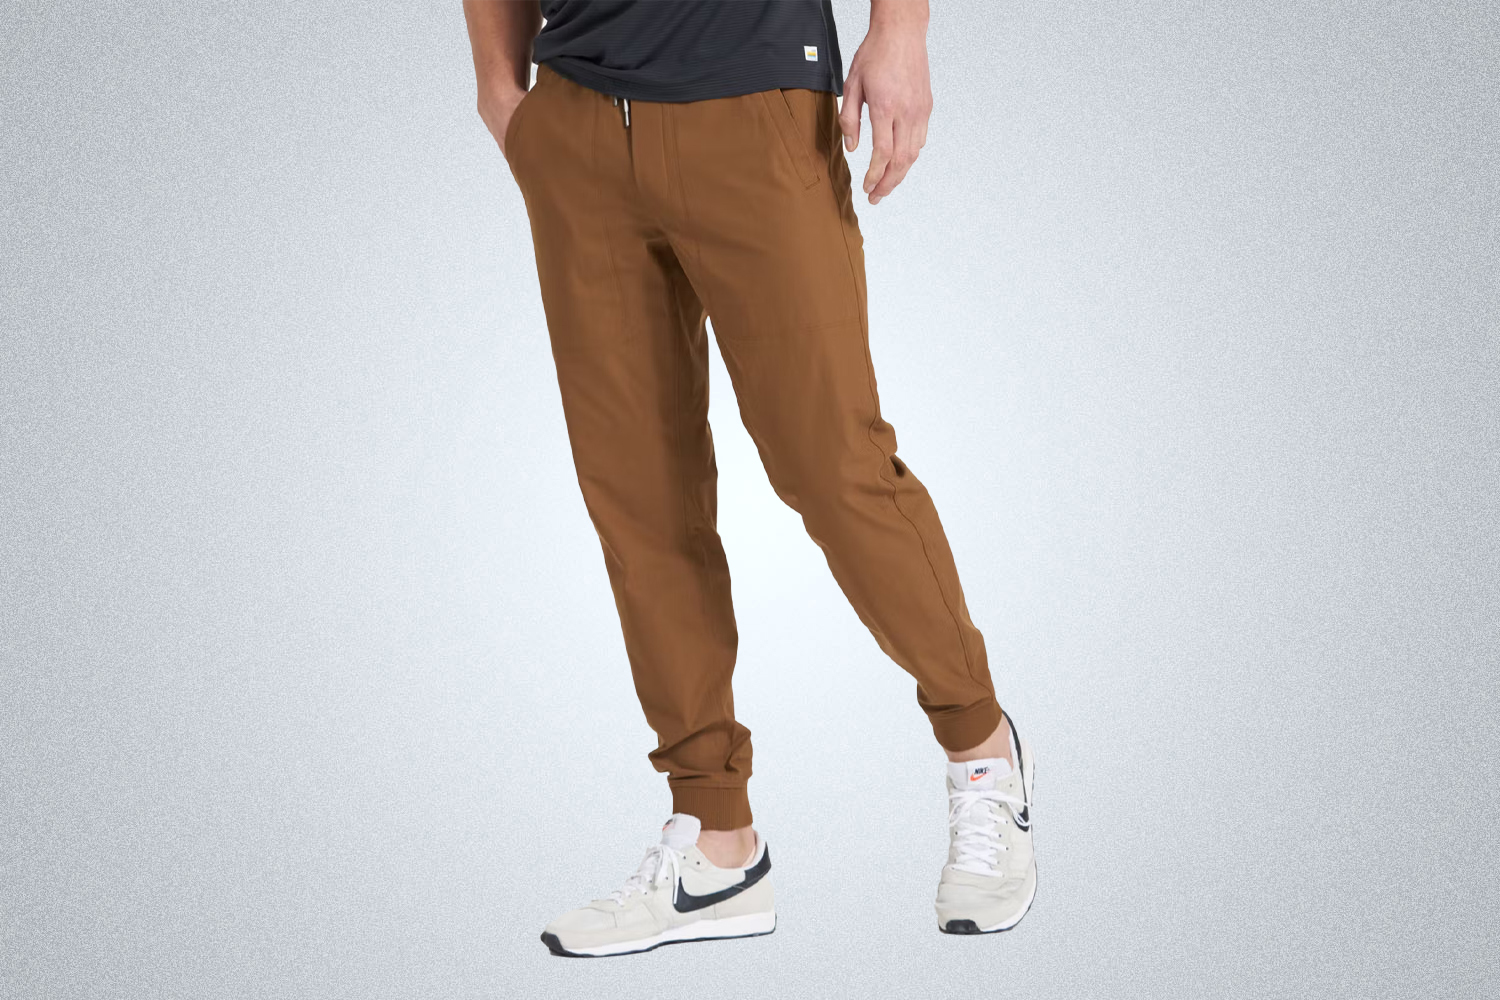 The Vuori Meta Jogger are some of the best short for short guys in 2022